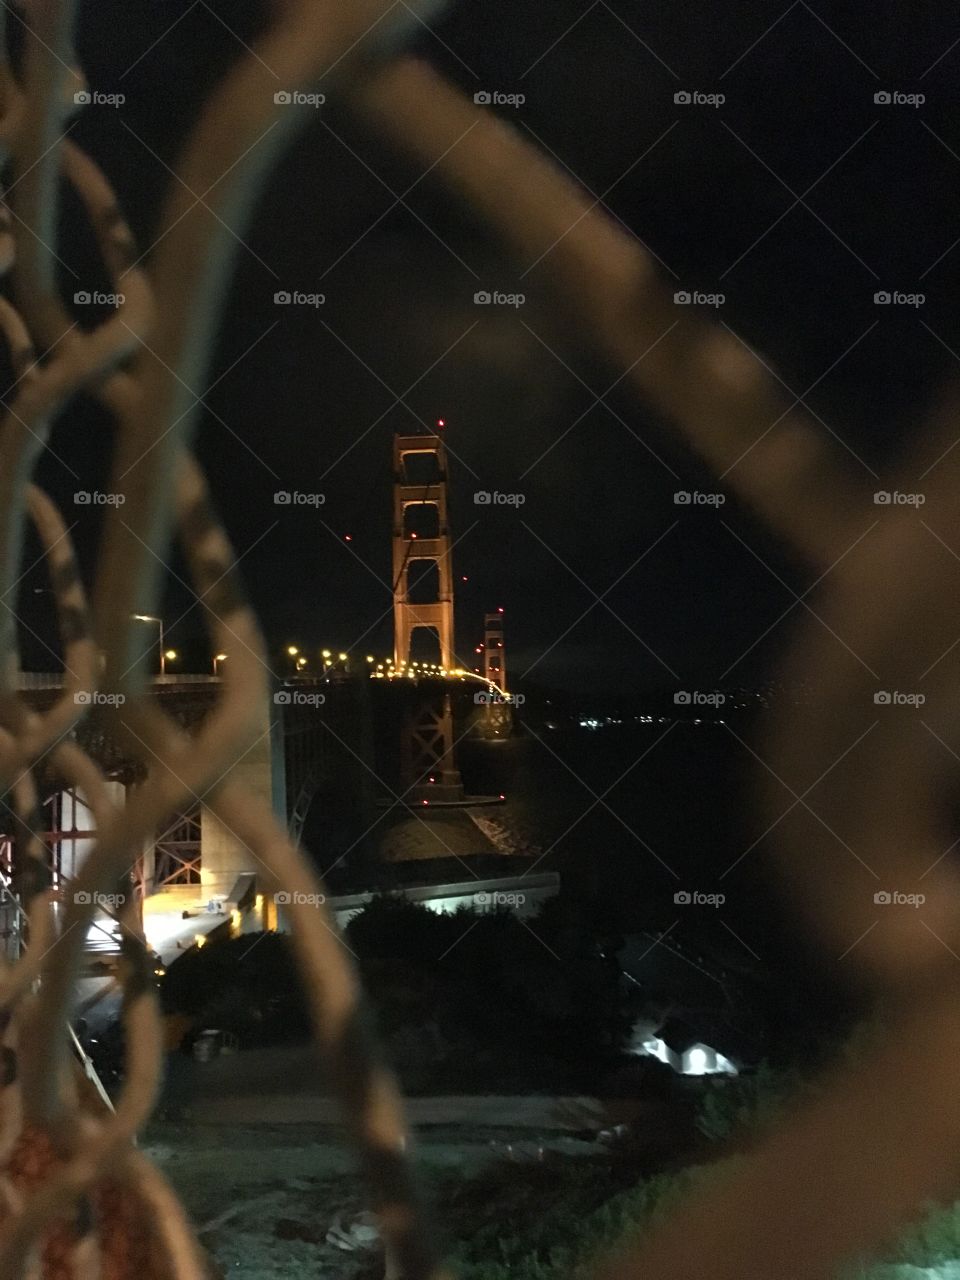 Golden Gate Bridge in San Francisco at night through a chain link fence